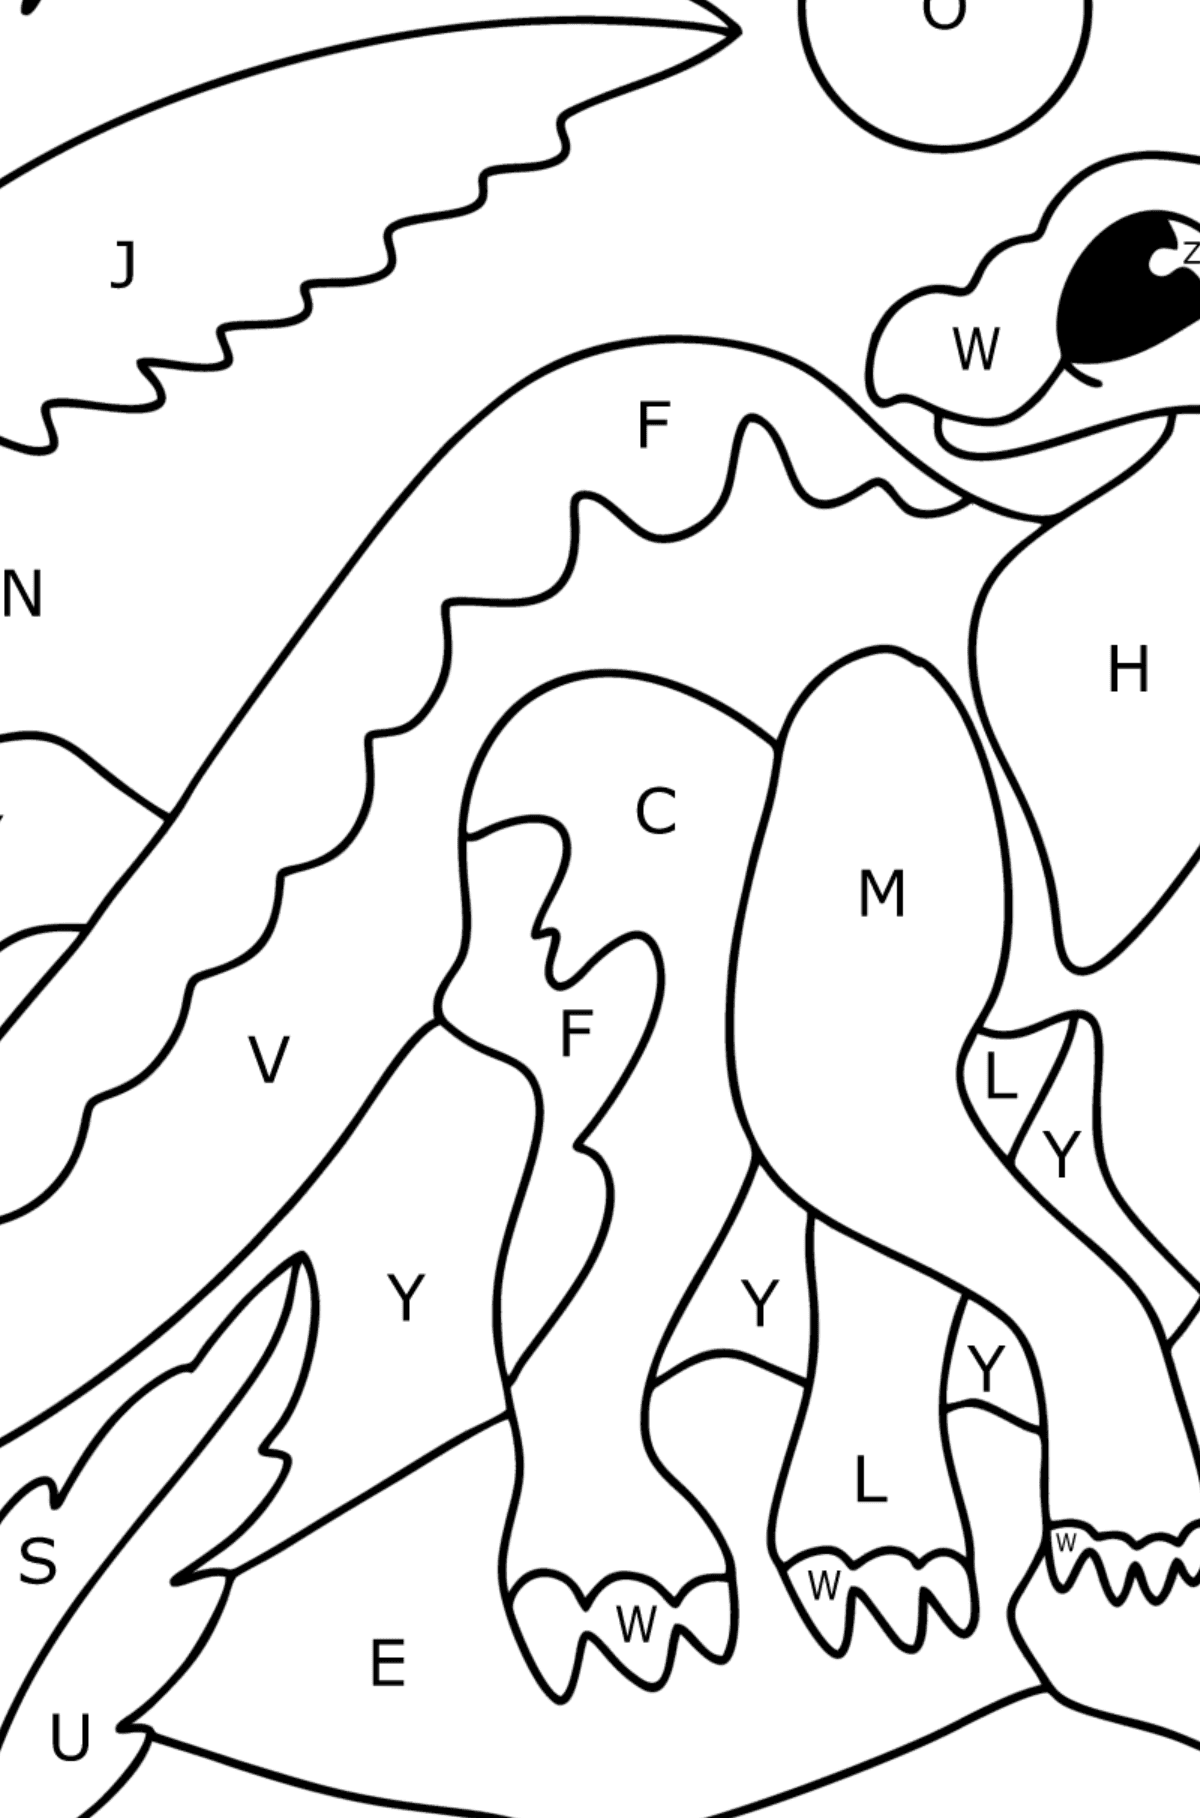 Iguanodon coloring page - Coloring by Letters for Kids